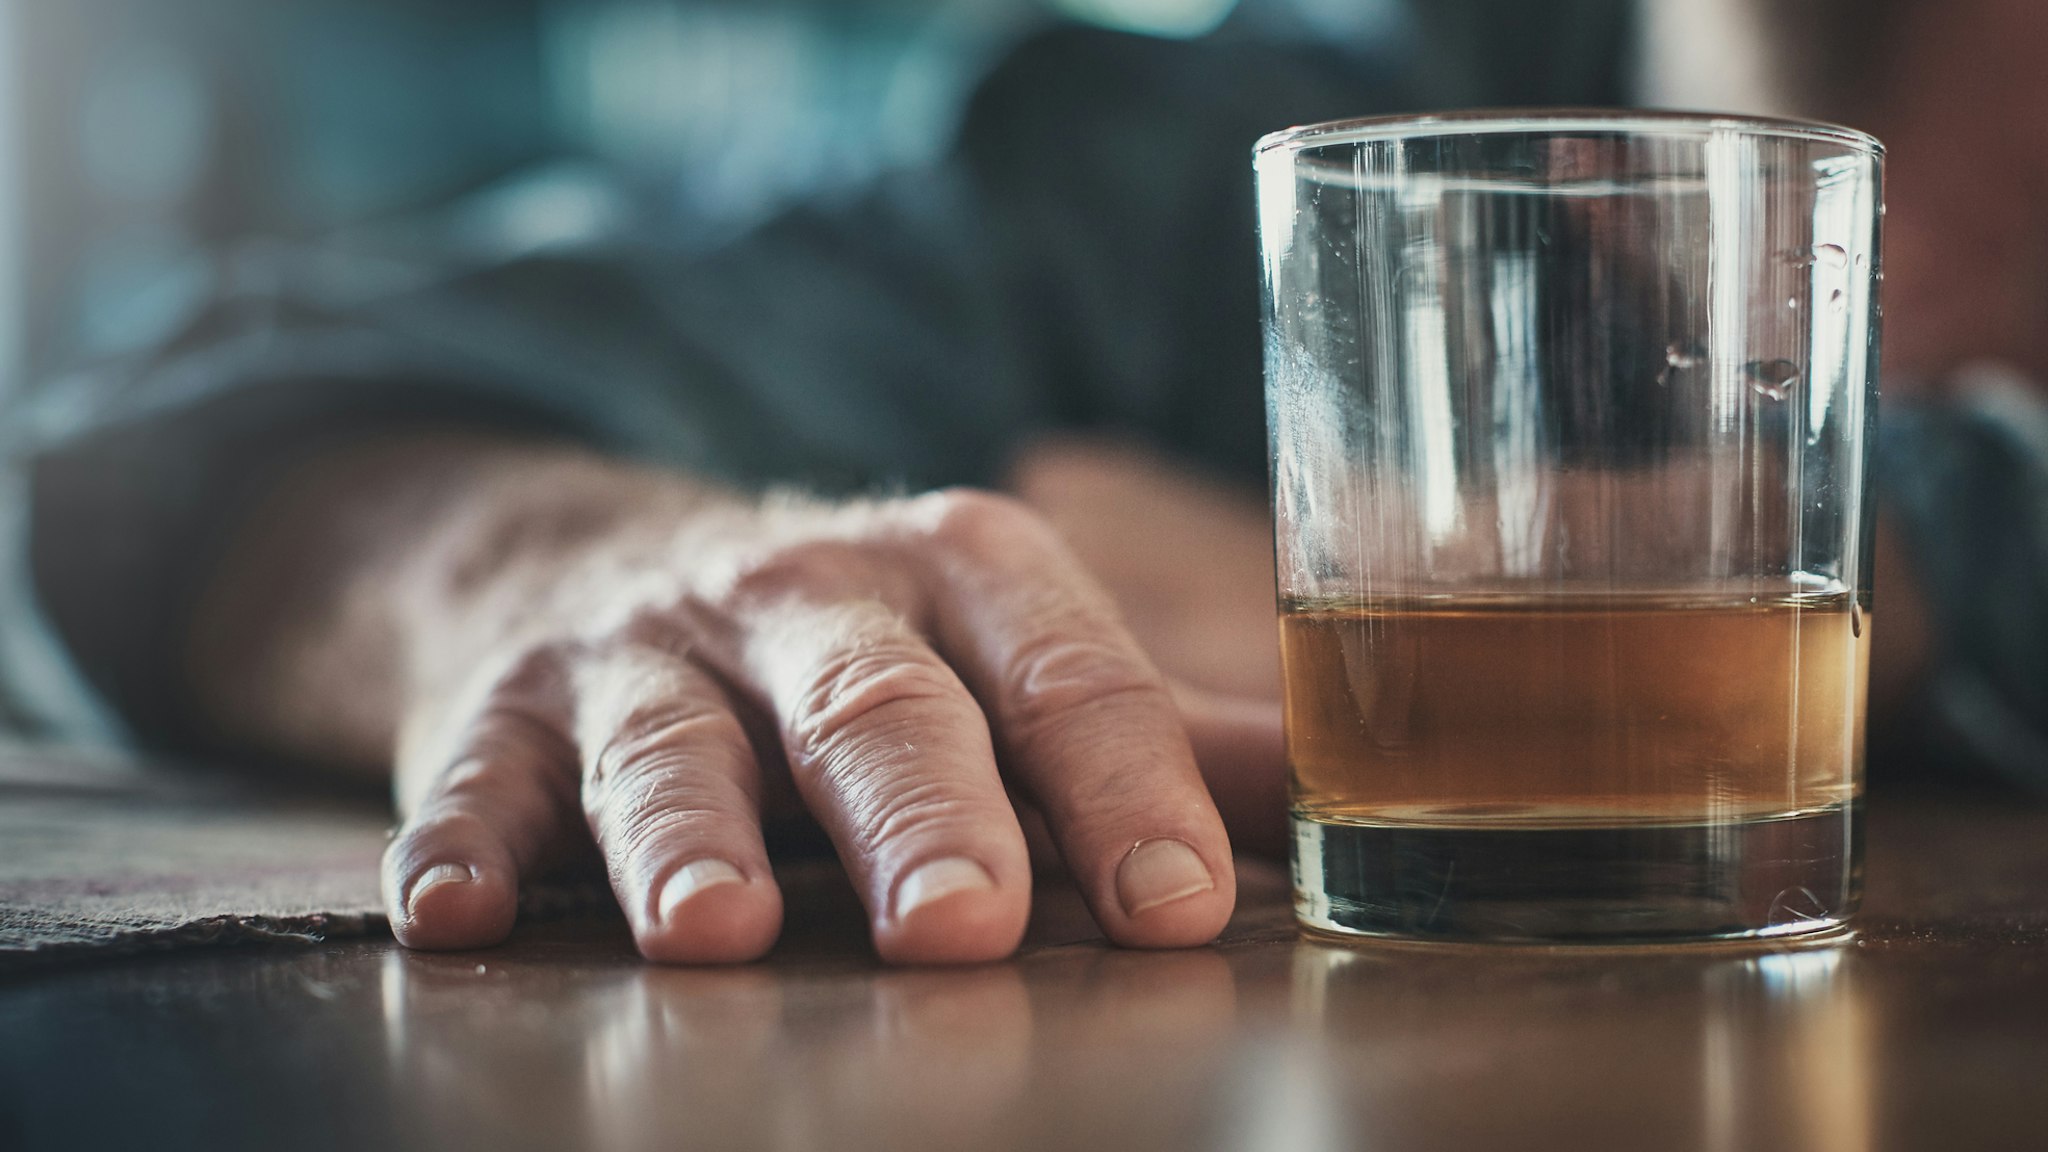 Hand by glass of liquor, man's head on table - stock photo